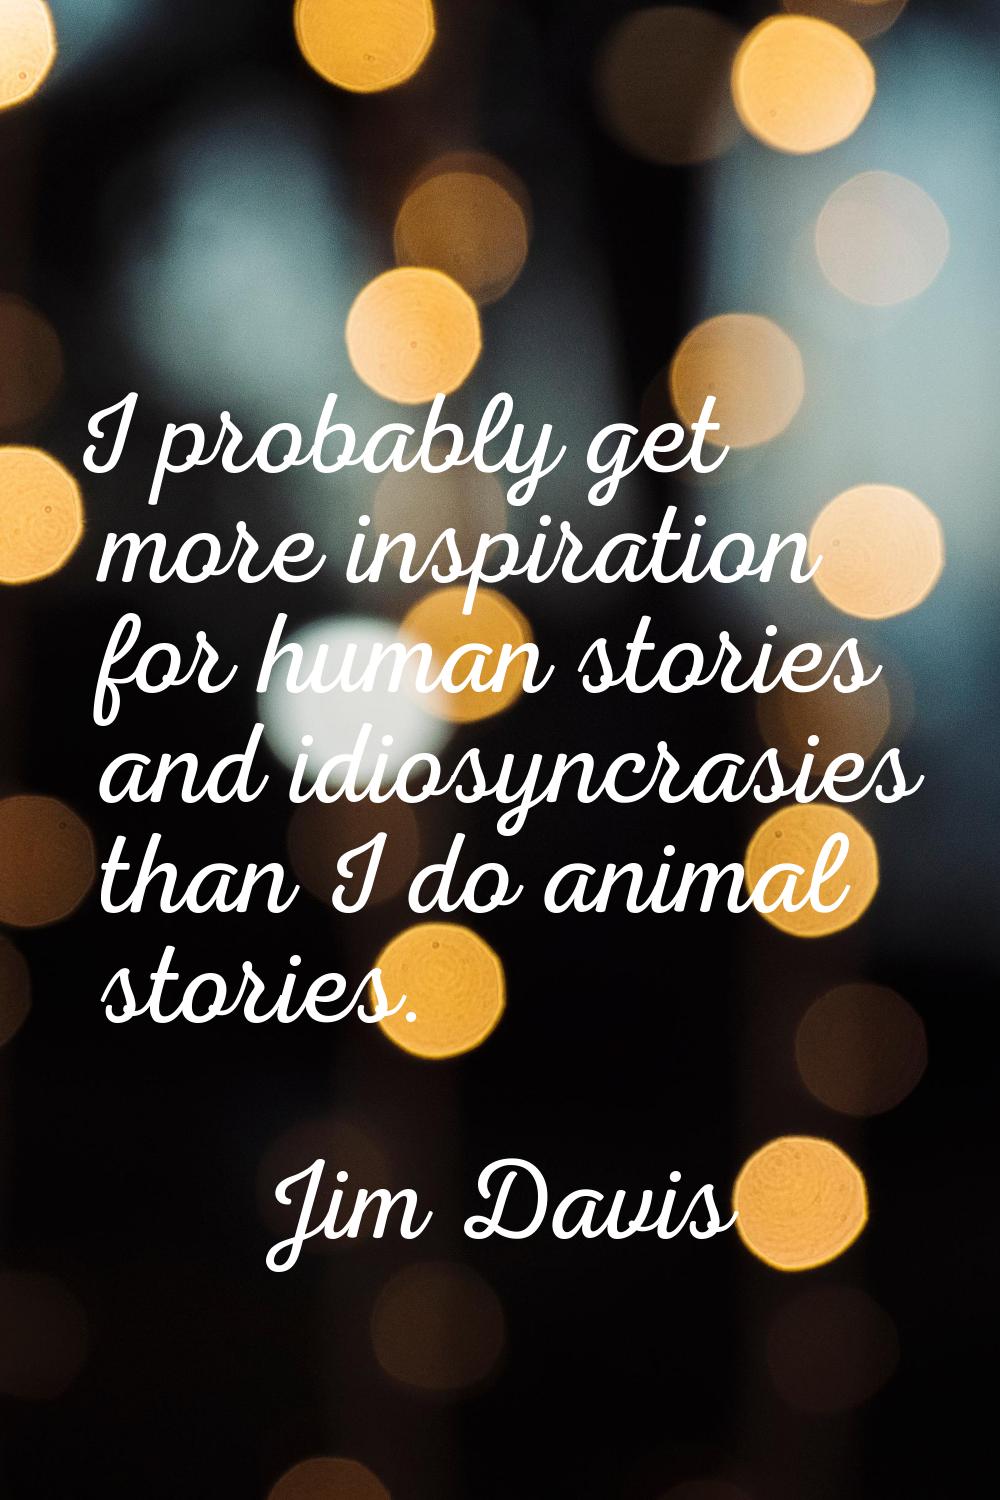 I probably get more inspiration for human stories and idiosyncrasies than I do animal stories.